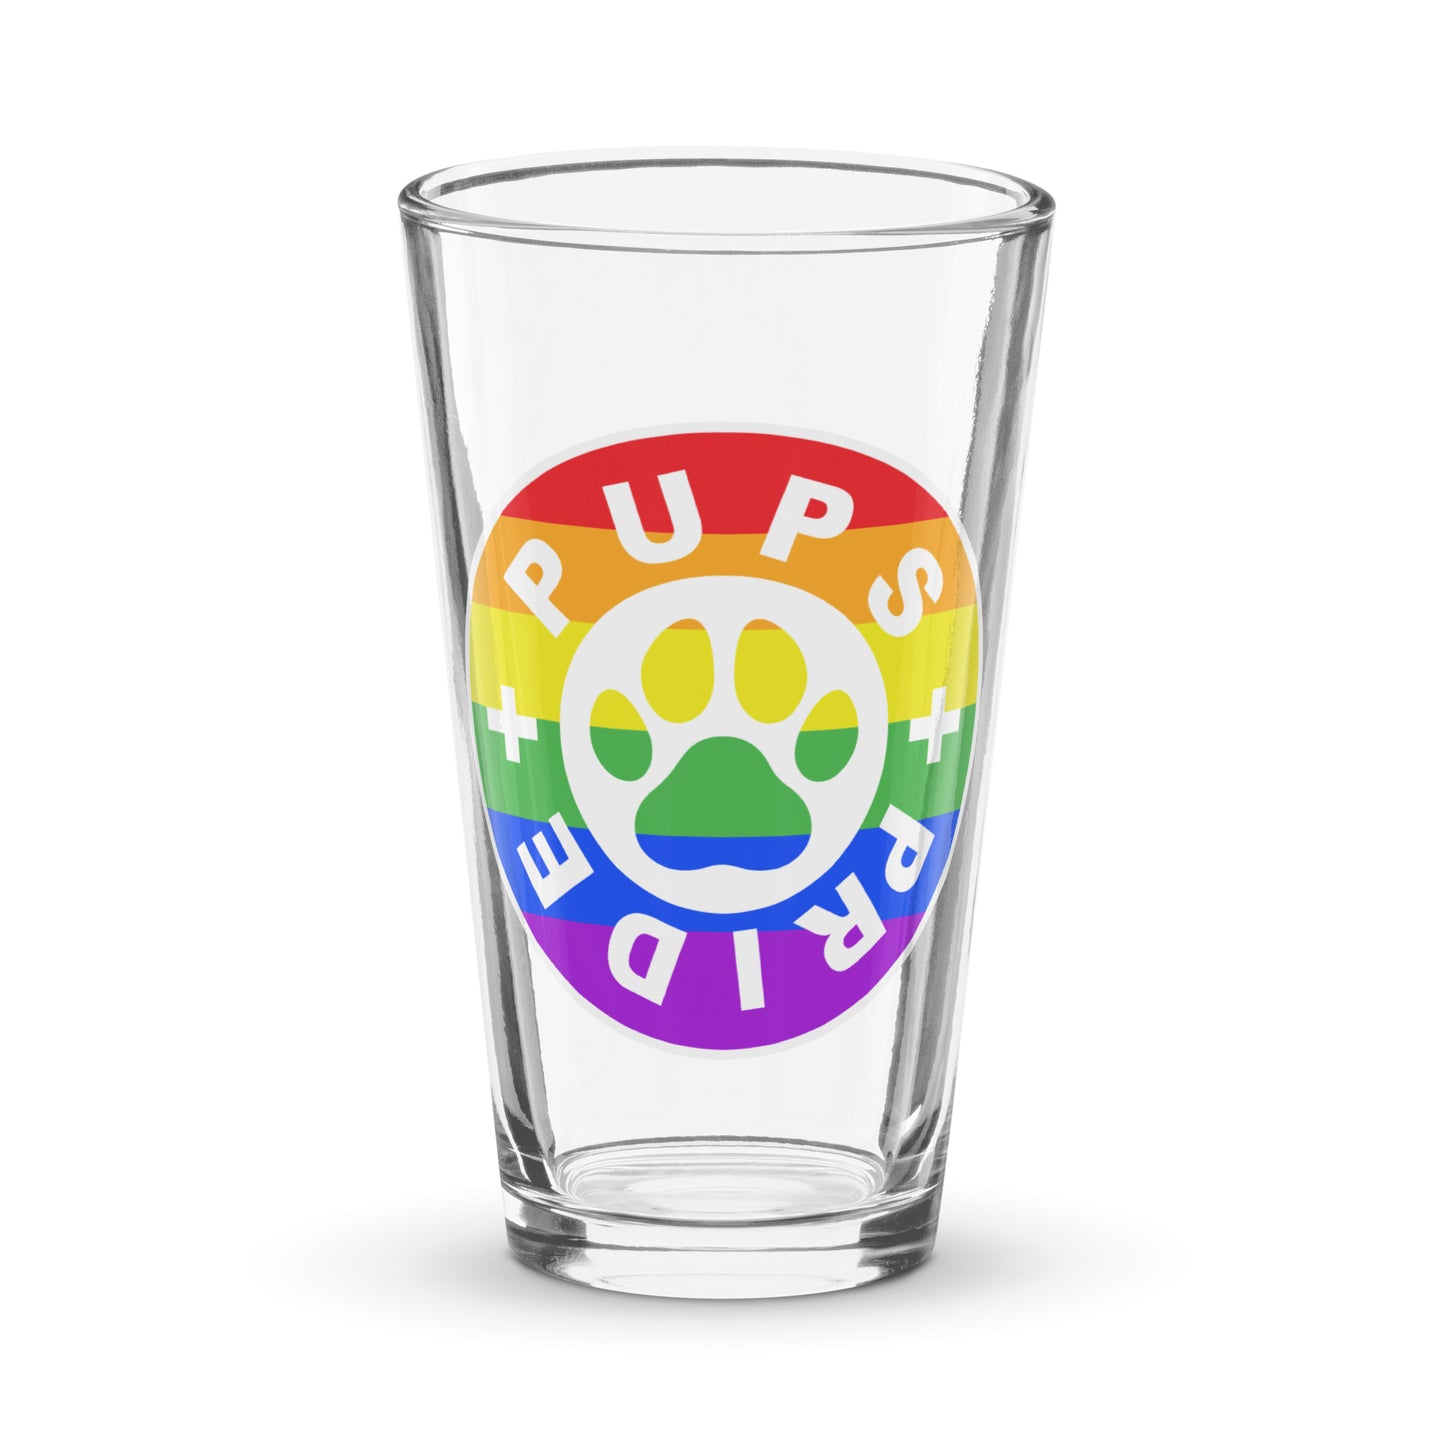 Pups and Pride Pint Glass